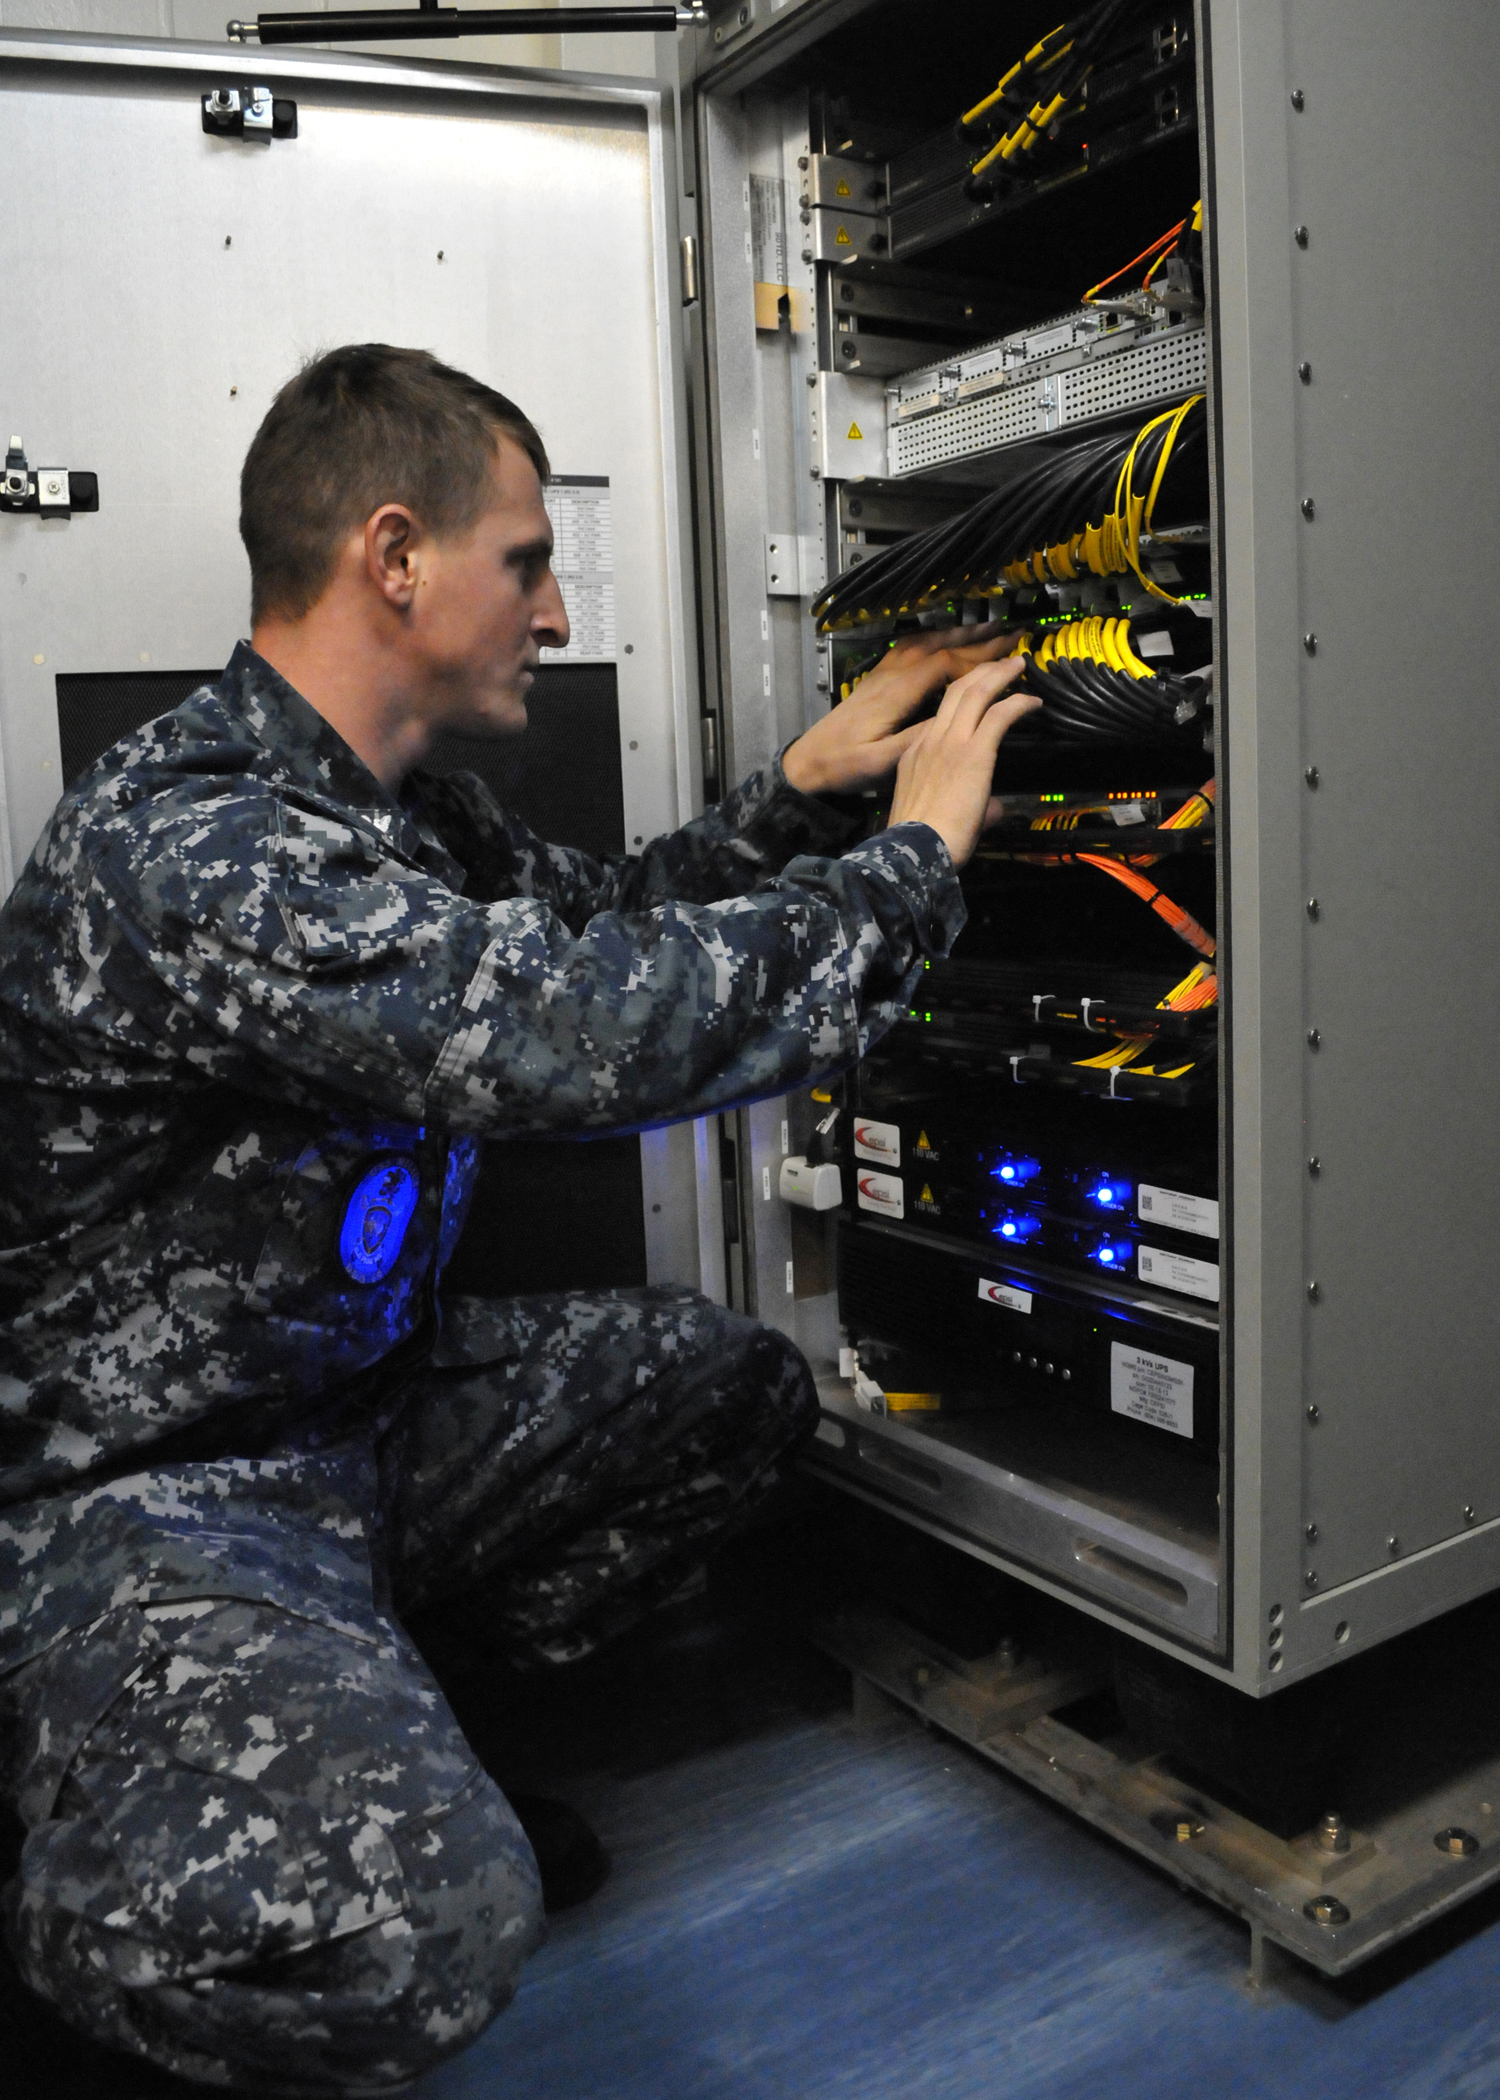 SAN DIEGO (Nov. 19, 2013) Information Systems Technician 2nd Class Anthony Pisciotto checks network connectors on the recently installed Consolidated Afloat Ships Network Enterprise Services (CANES) system in the close confines of the Local Area Network (LAN) Equipment Room aboard the guided missile destroyer USS Milius (DDG 69). U.S. Navy photo by Rick Naystatt.